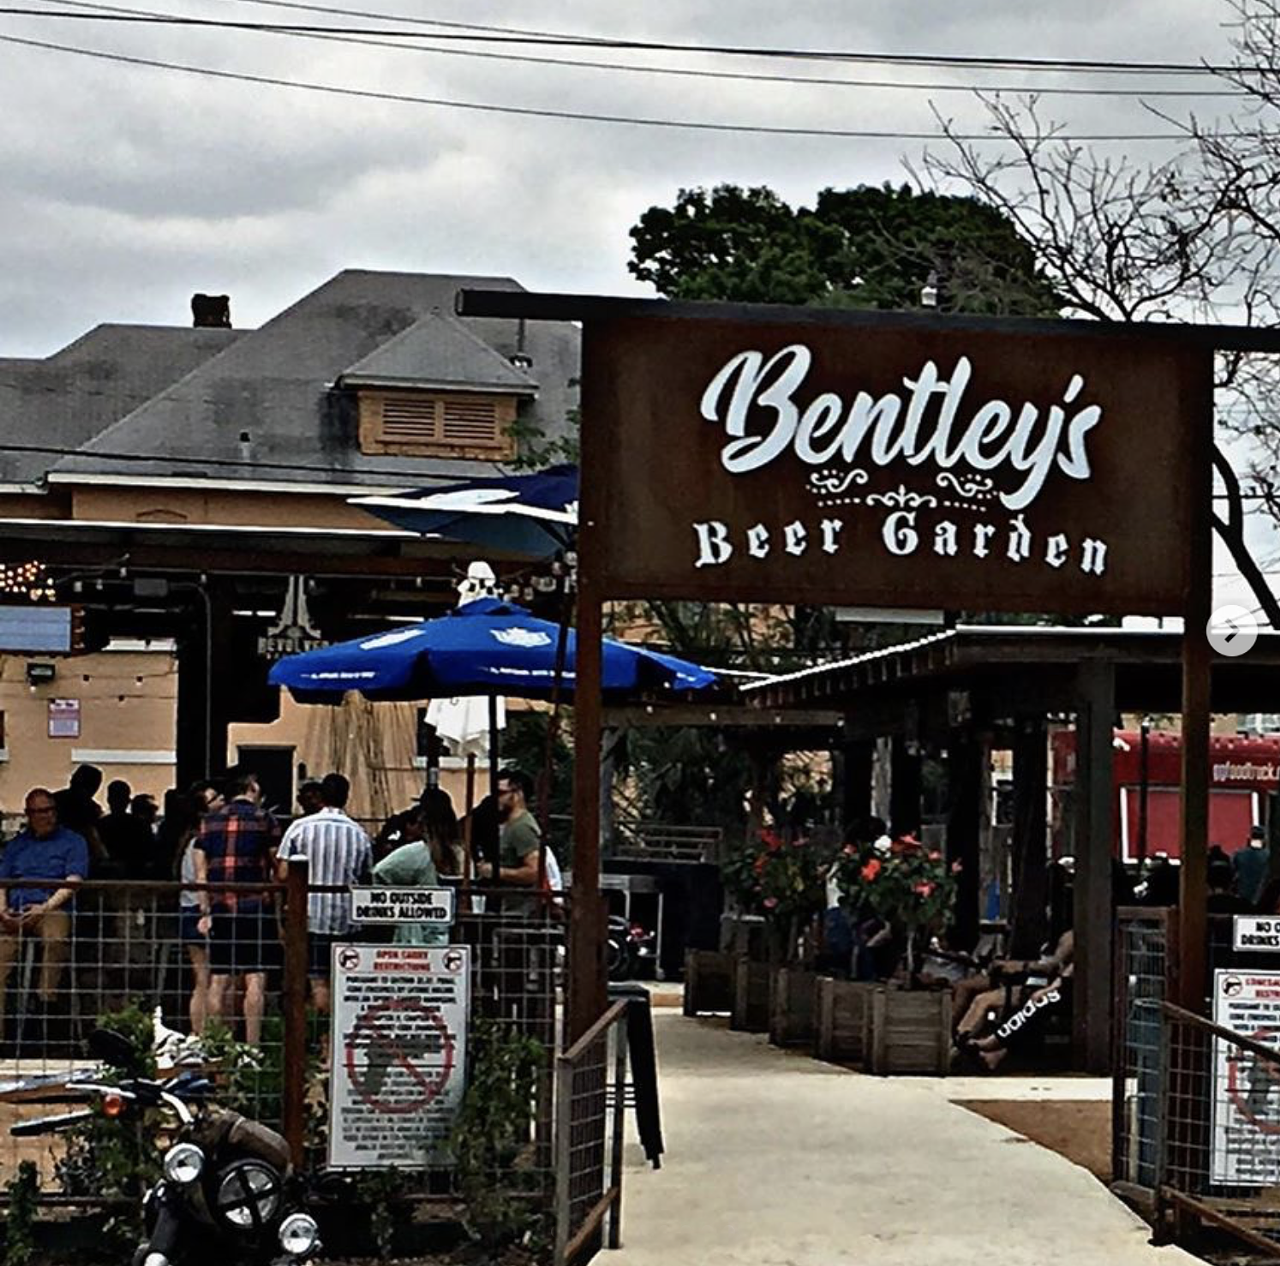 Bentley’s Beer Garden
802 N Alamo St., (210) 980-9401, facebook.com/bentleysbeergarden
Situated on North Alamo Street, near Roadmap Brewing Co., Bentley’s has got it all: large outdoor bars, TVs, swing seats, live music stages and frozen margs. Check their social media for band lineups. 
Photo via Instagram /  
flashlucich